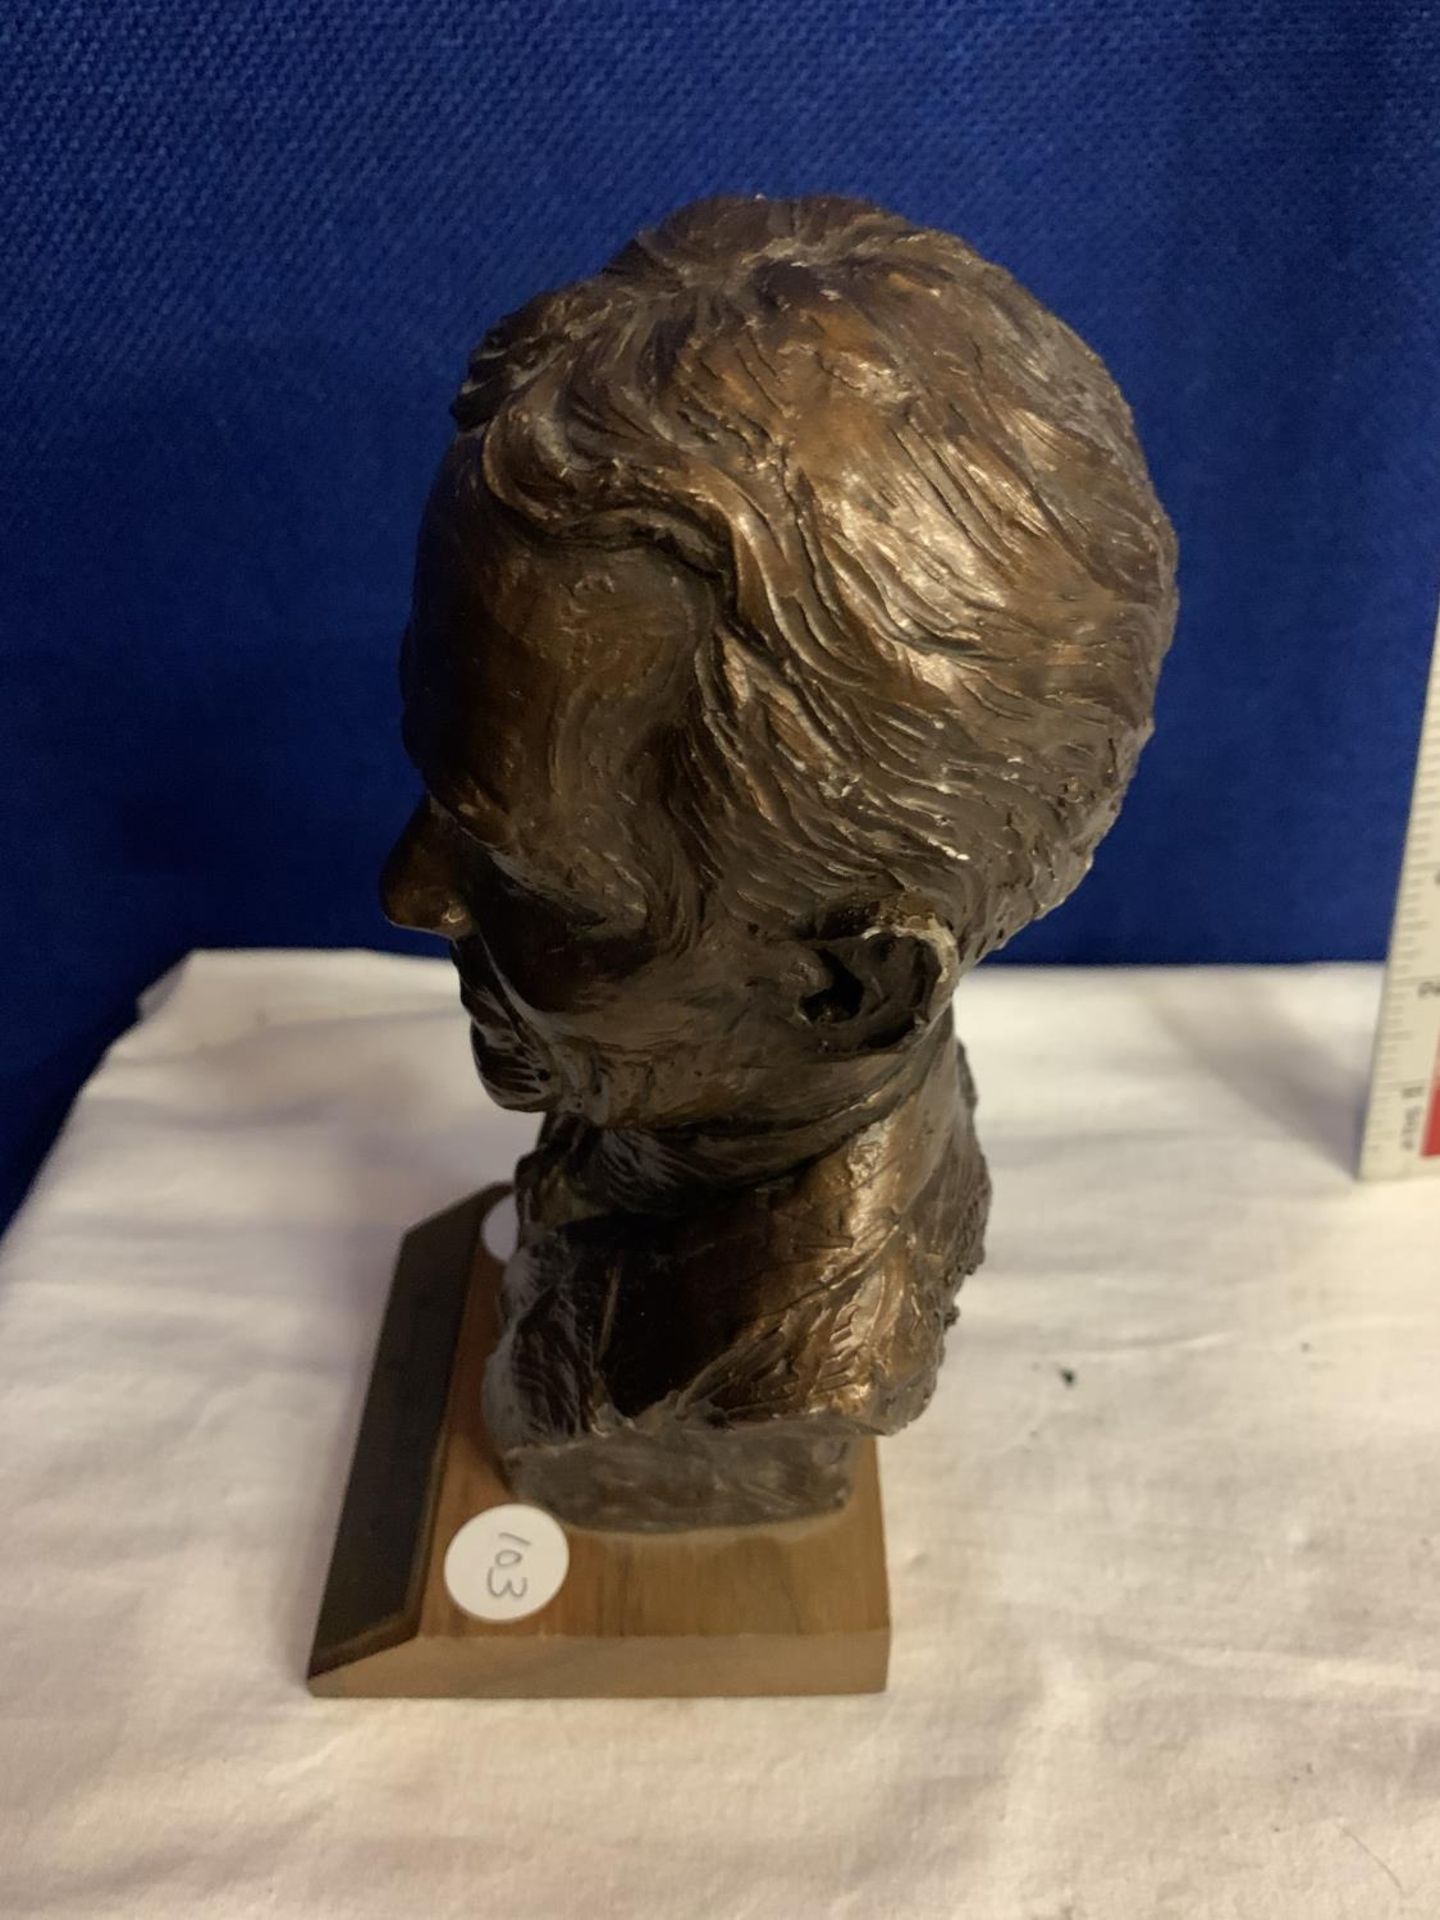 A SMALL RESIN BUST OF HENRY FORD - Image 2 of 4